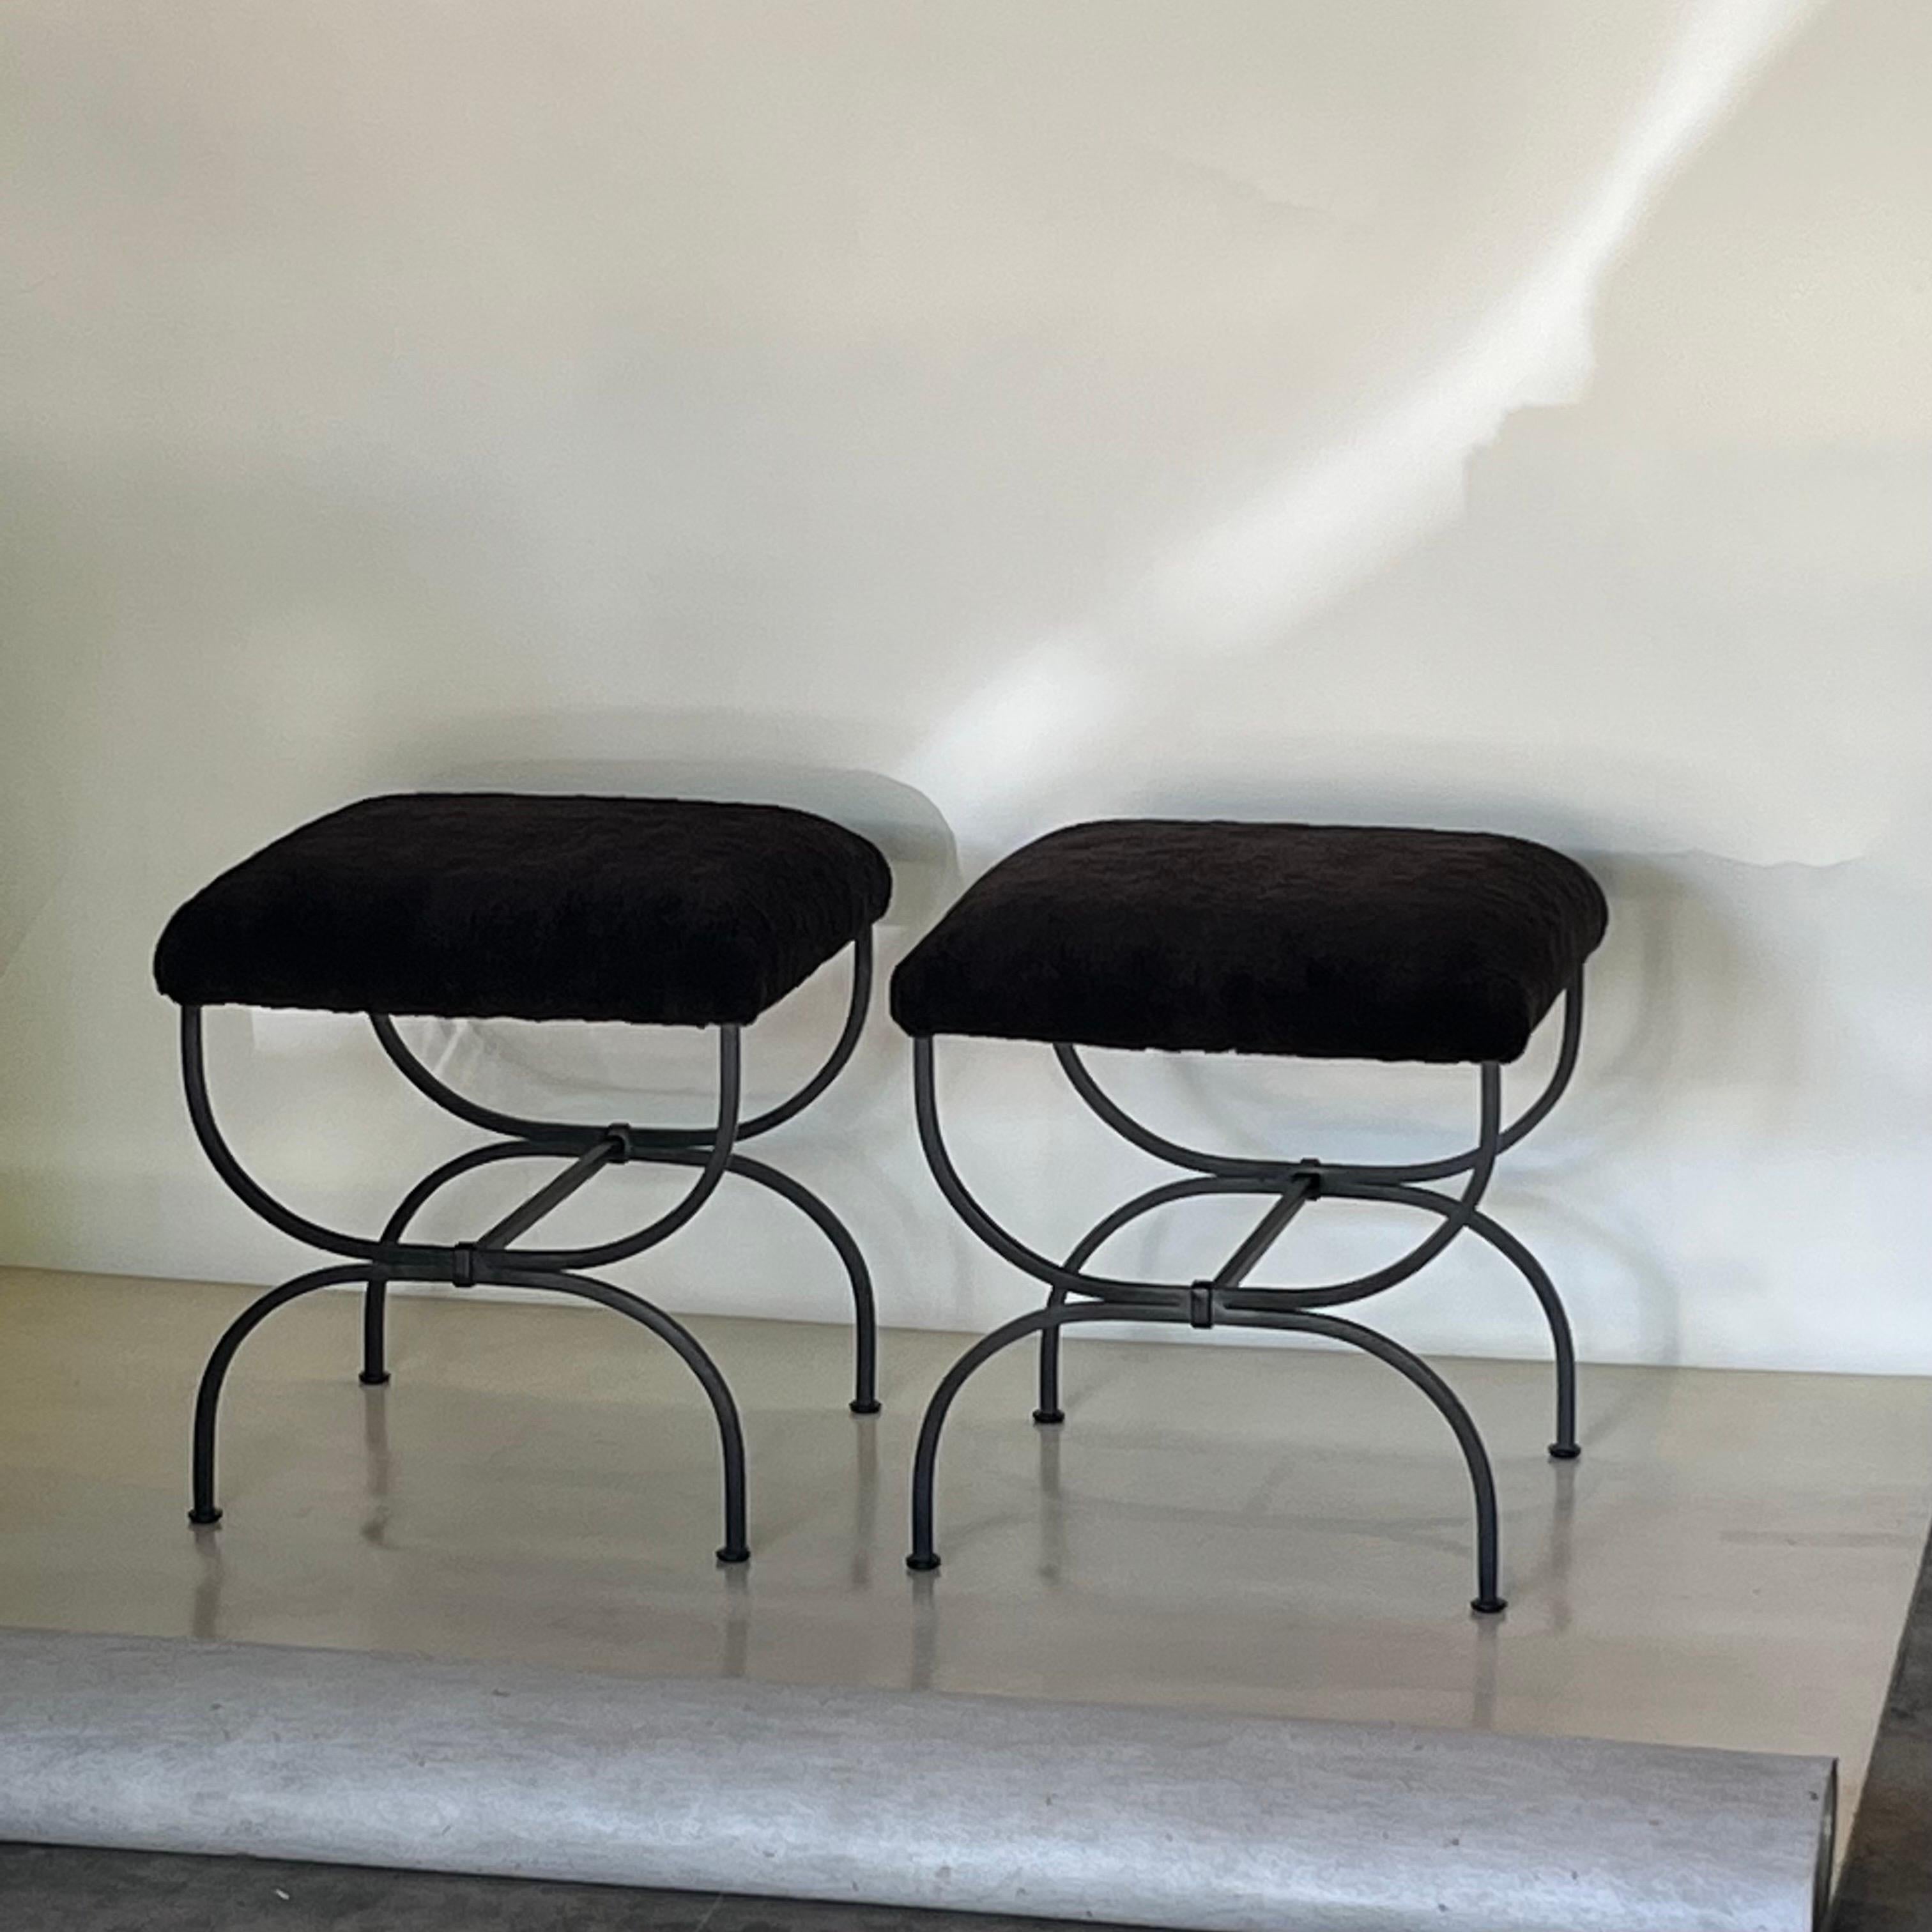 Pair of 'Strapontin' dark gray shearling stools by Design Frères.

Chic and understated.